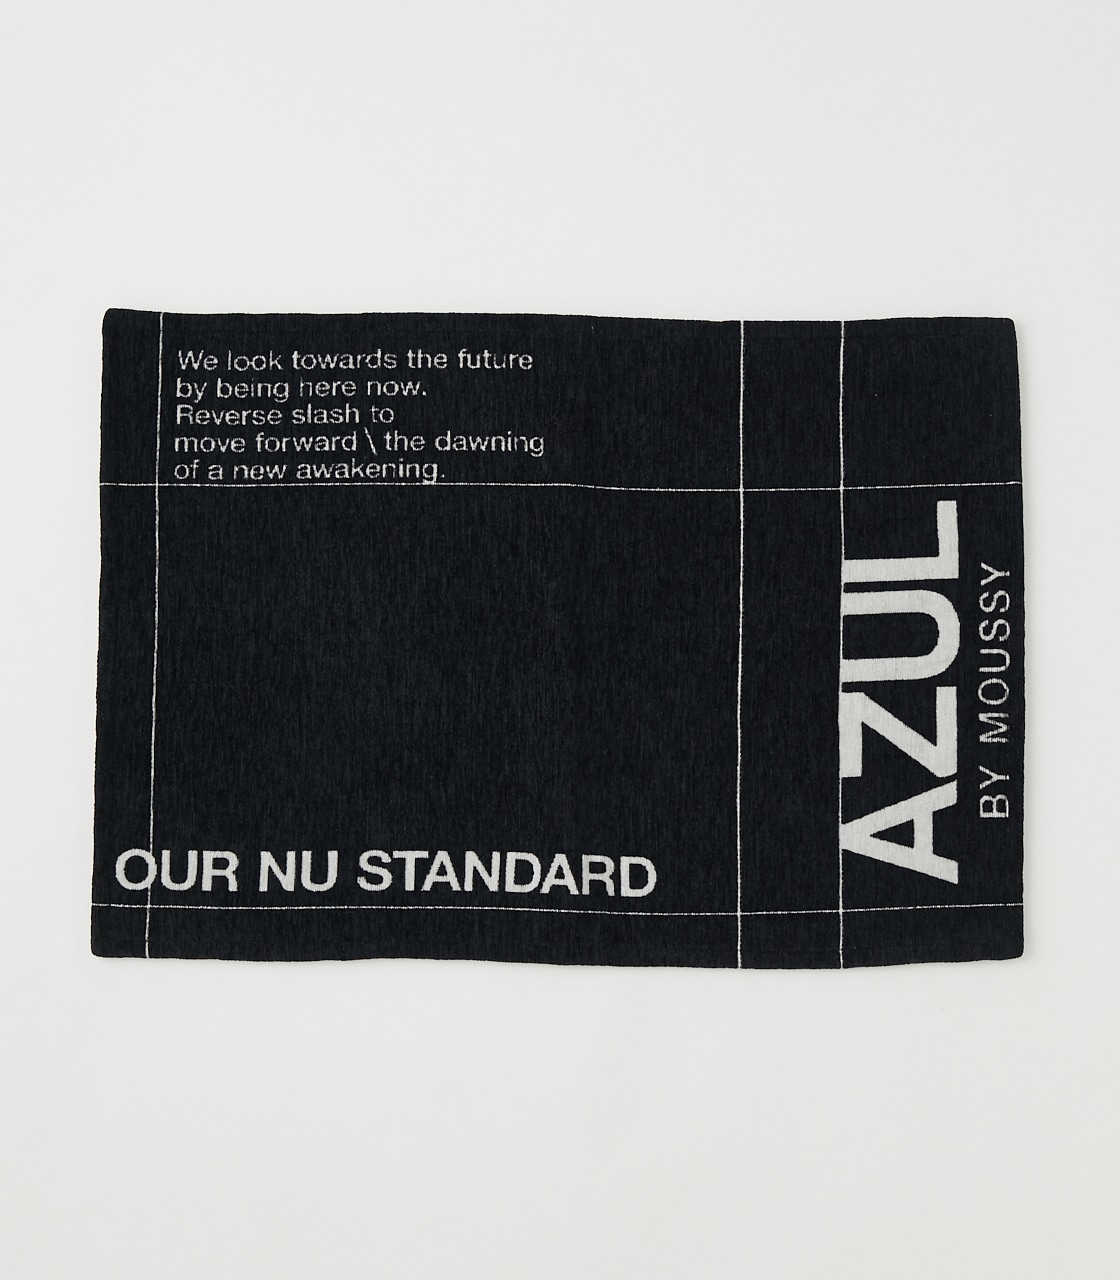 T/H OUR NU STANDARD MAT/T/Hアウアニュースタンダードマット 詳細画像 BLK 1